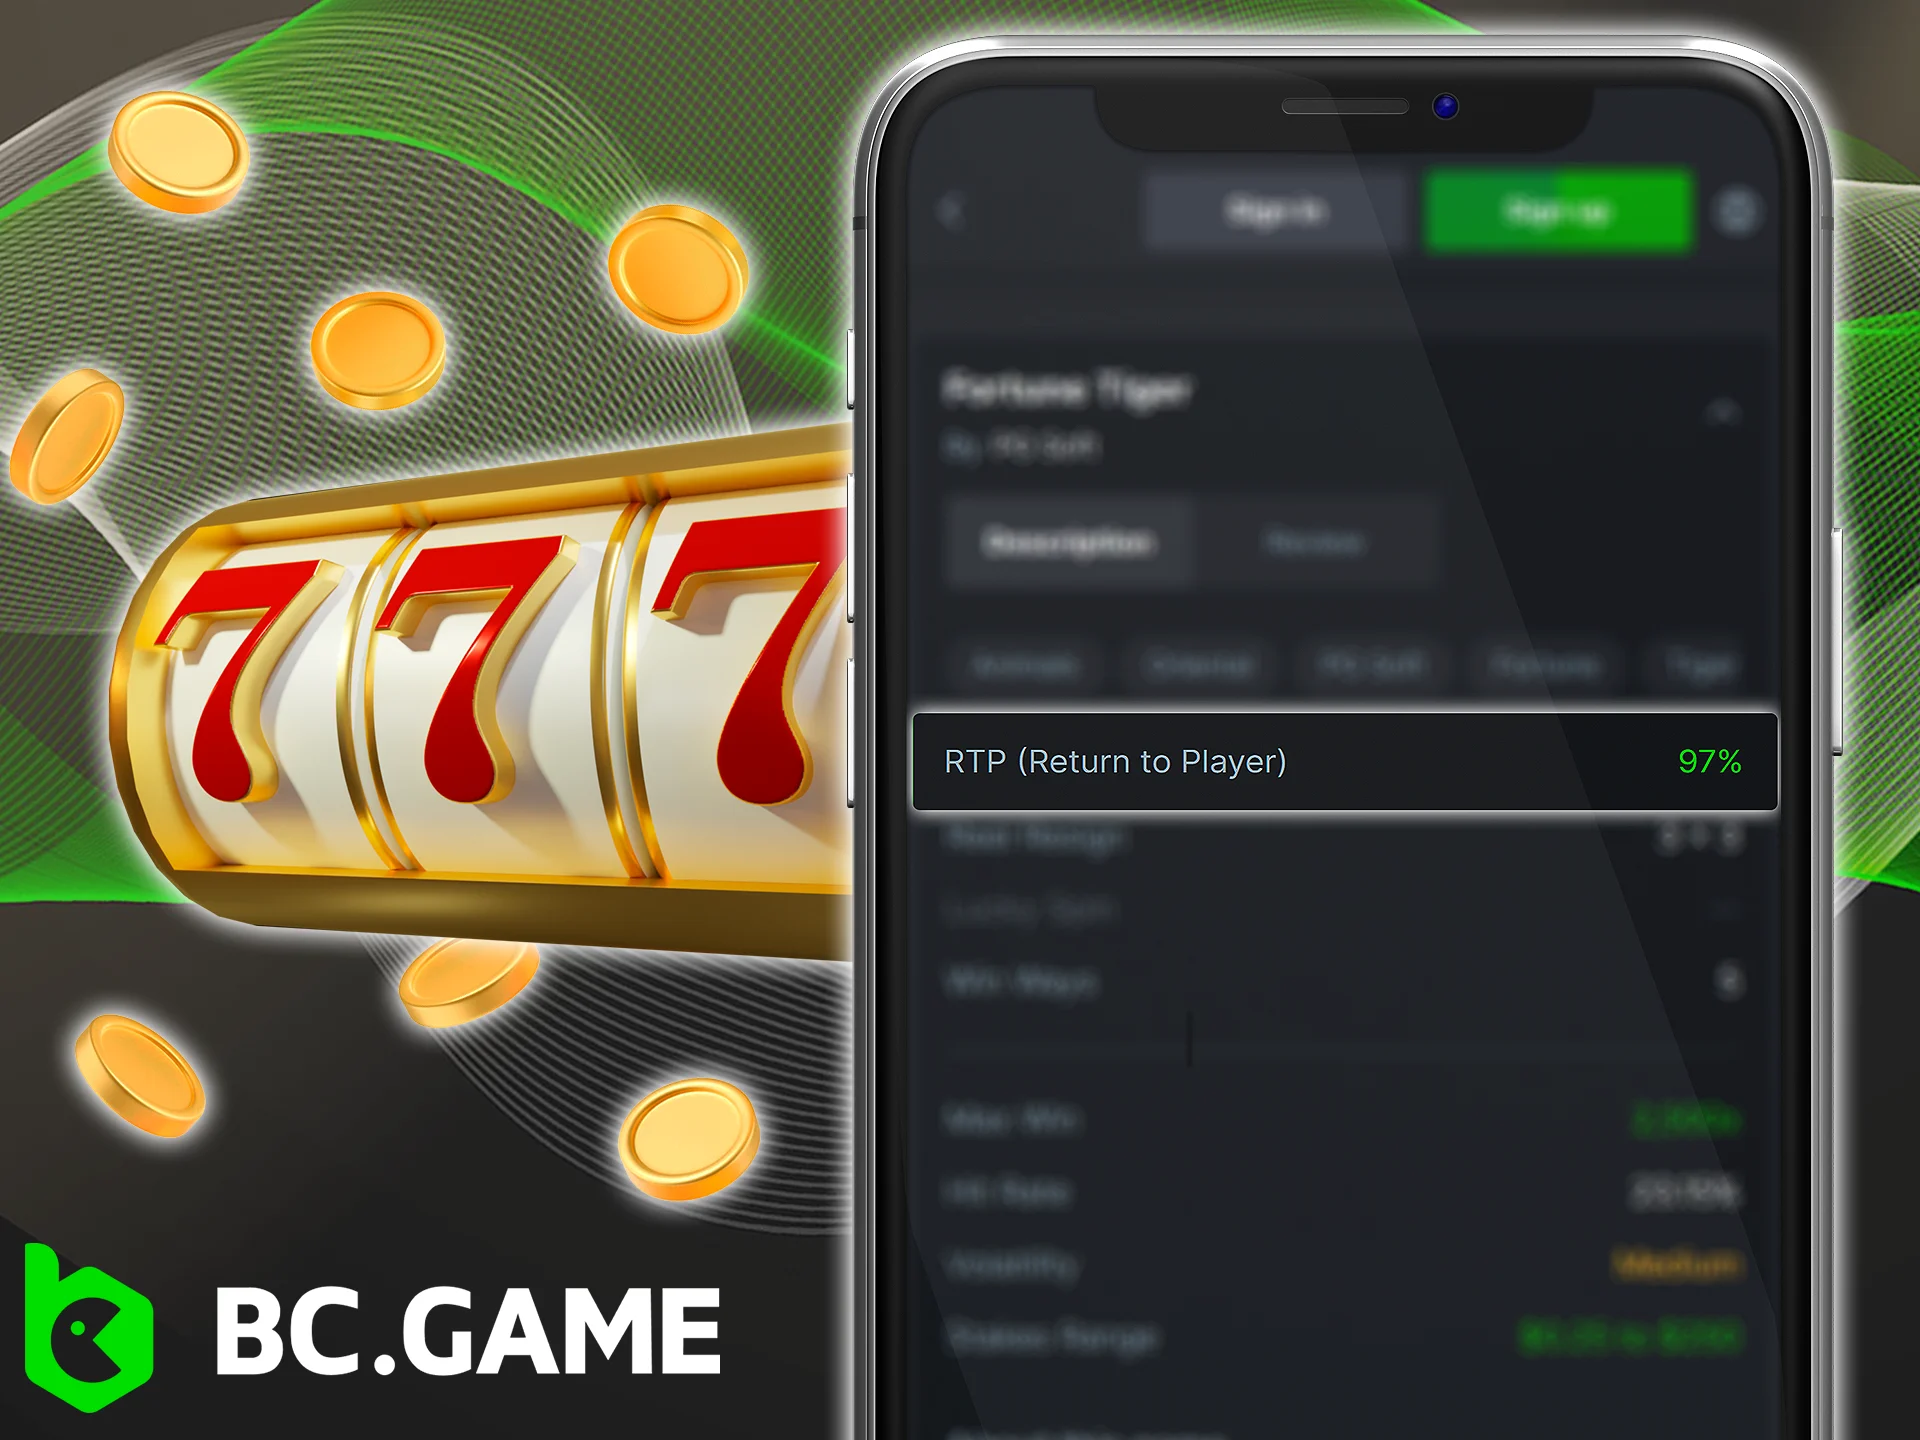 Open BC Game and choose slots with high RTP to get big winnings.